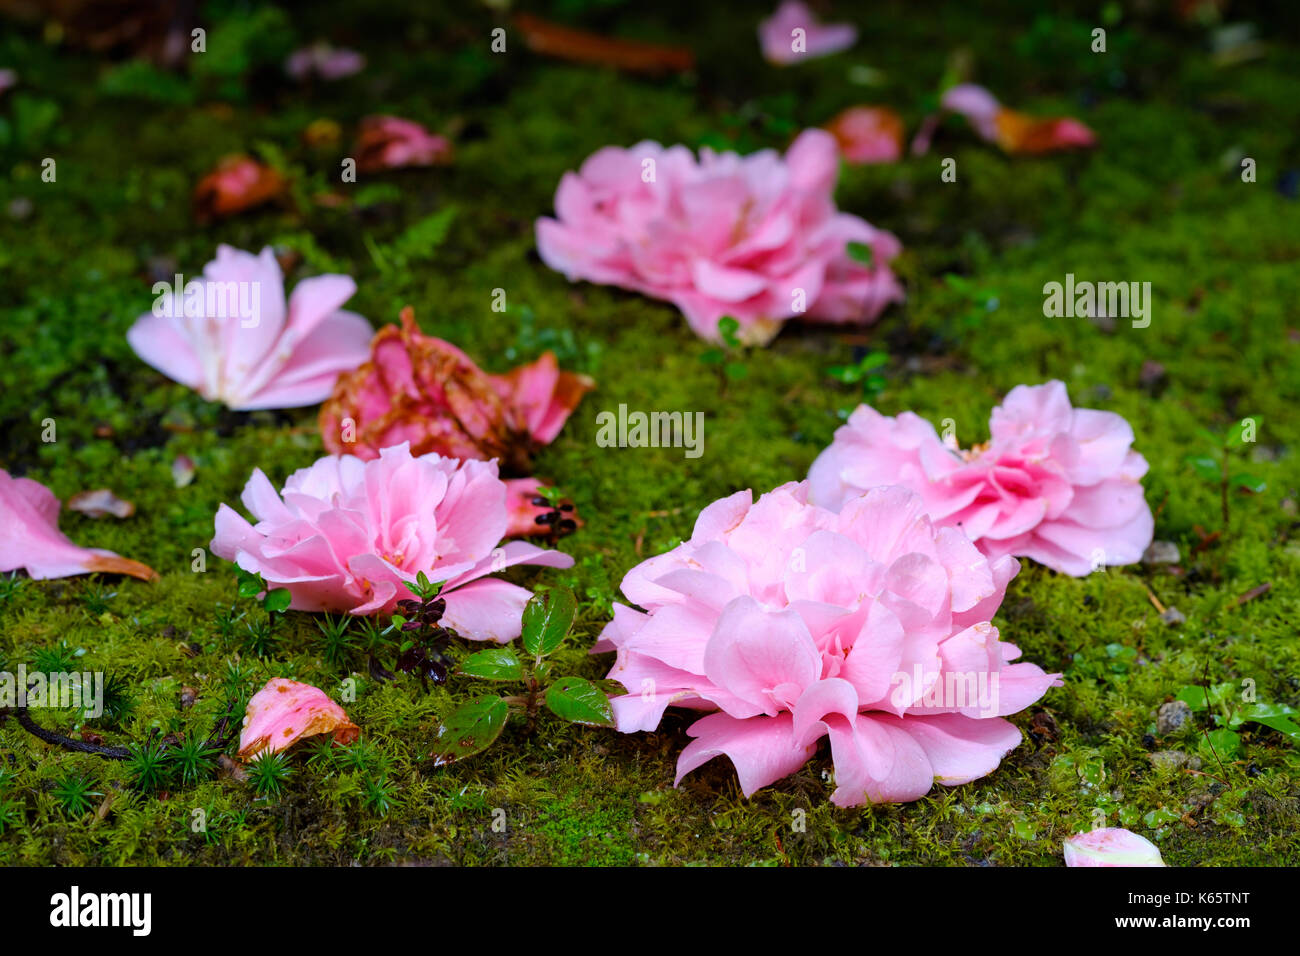 Faded flowers of Camellia (Camellia) are lying on the ground, Trewidden Garden, near Penzance, Cornwall, England, Great Britain Stock Photo